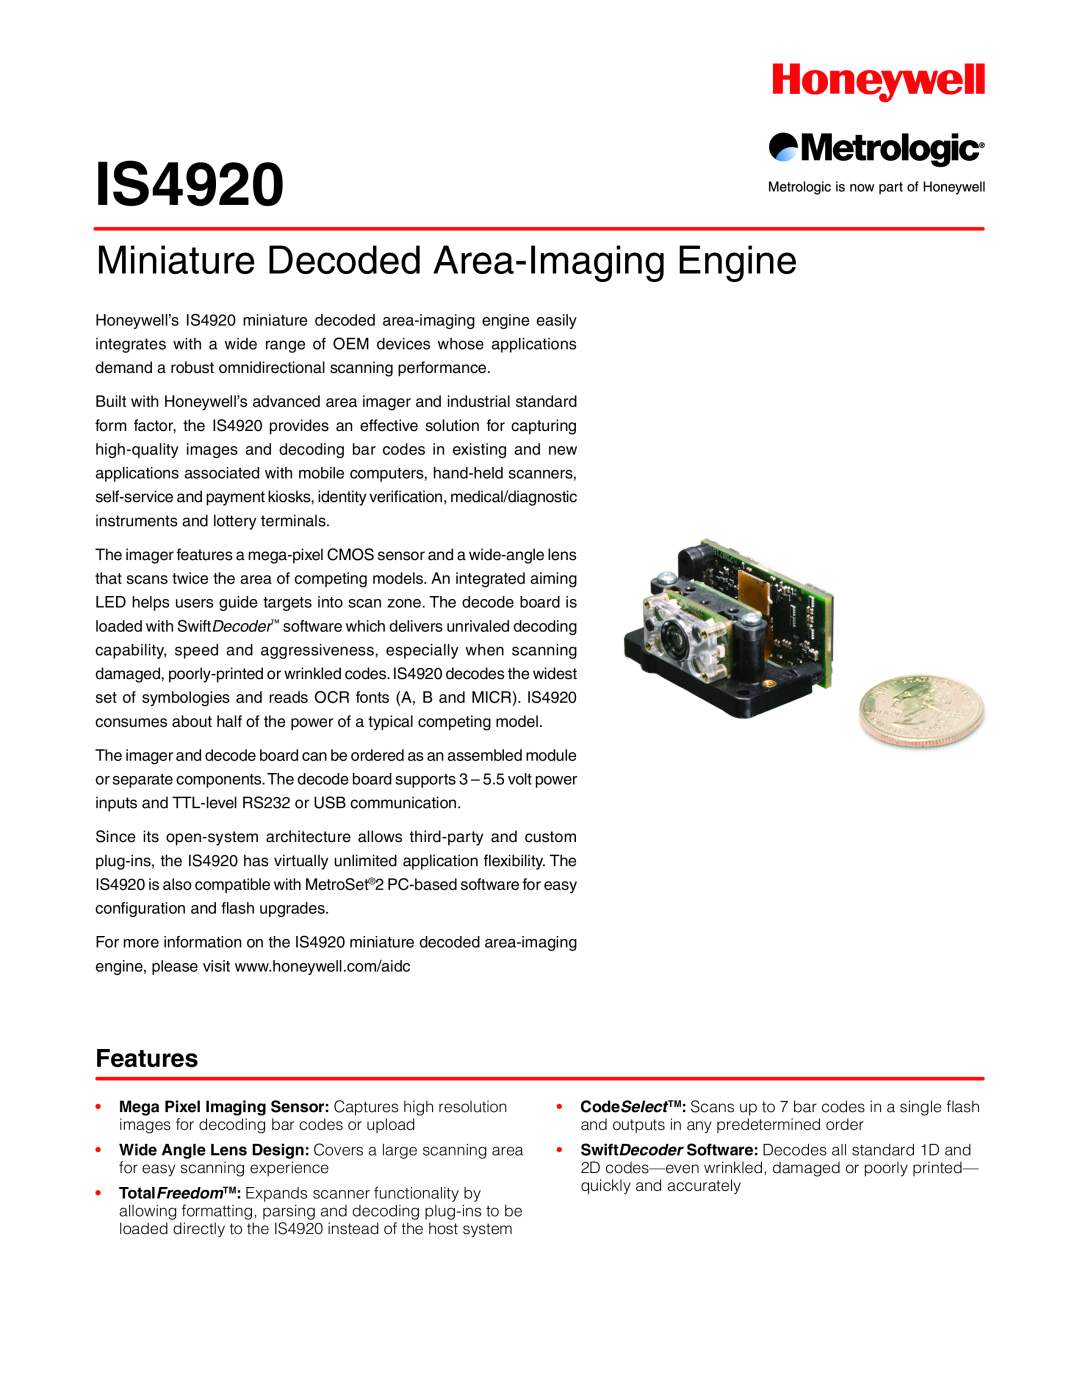 Metrologic Instruments IS4920 manual Miniature Decoded Area-Imaging Engine, Features 